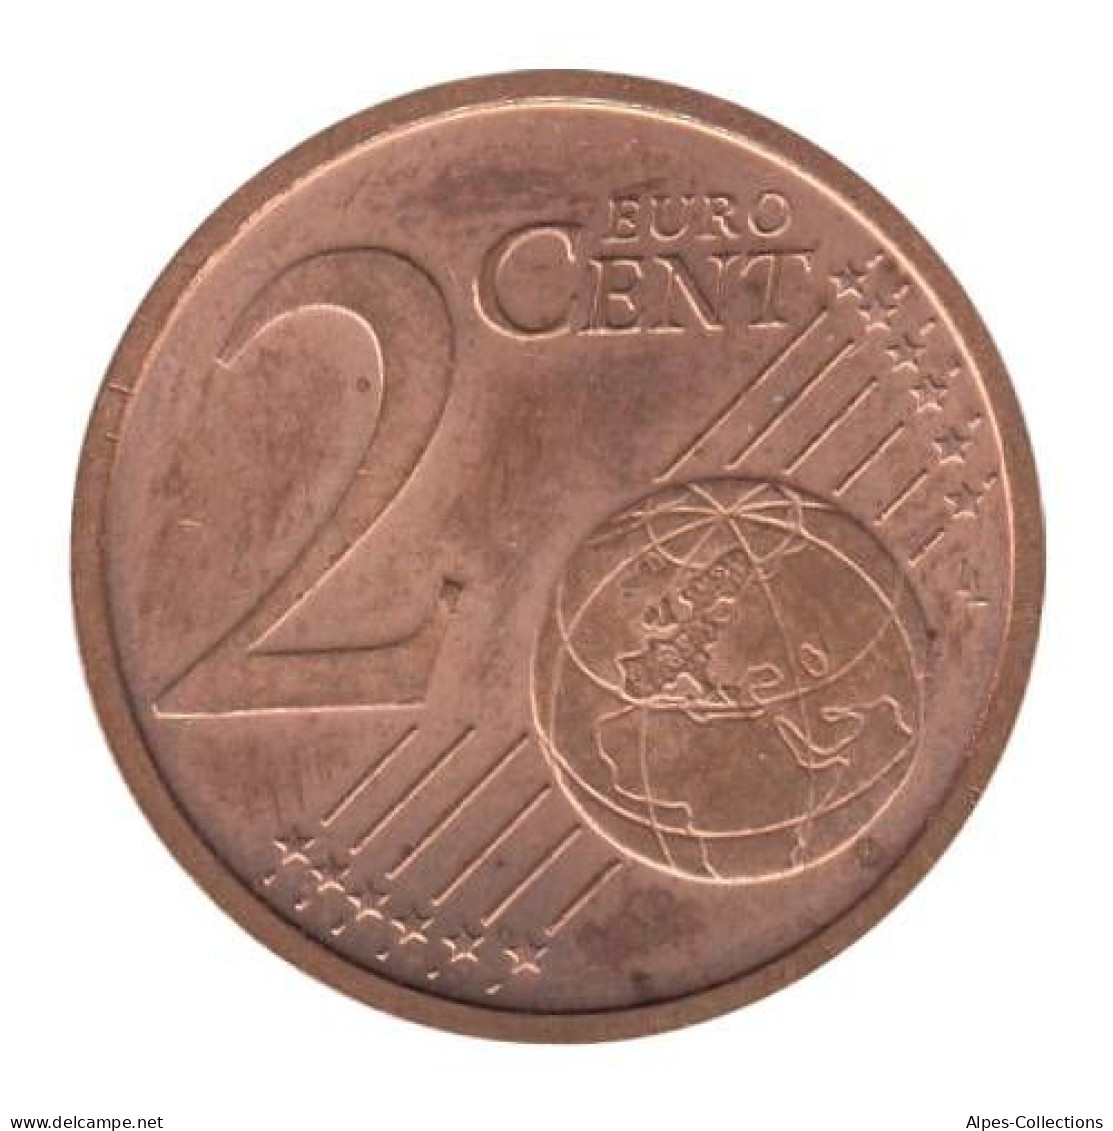 AL00202.1A - ALLEMAGNE - 2 Cents D'euro - 2002 A - Germany